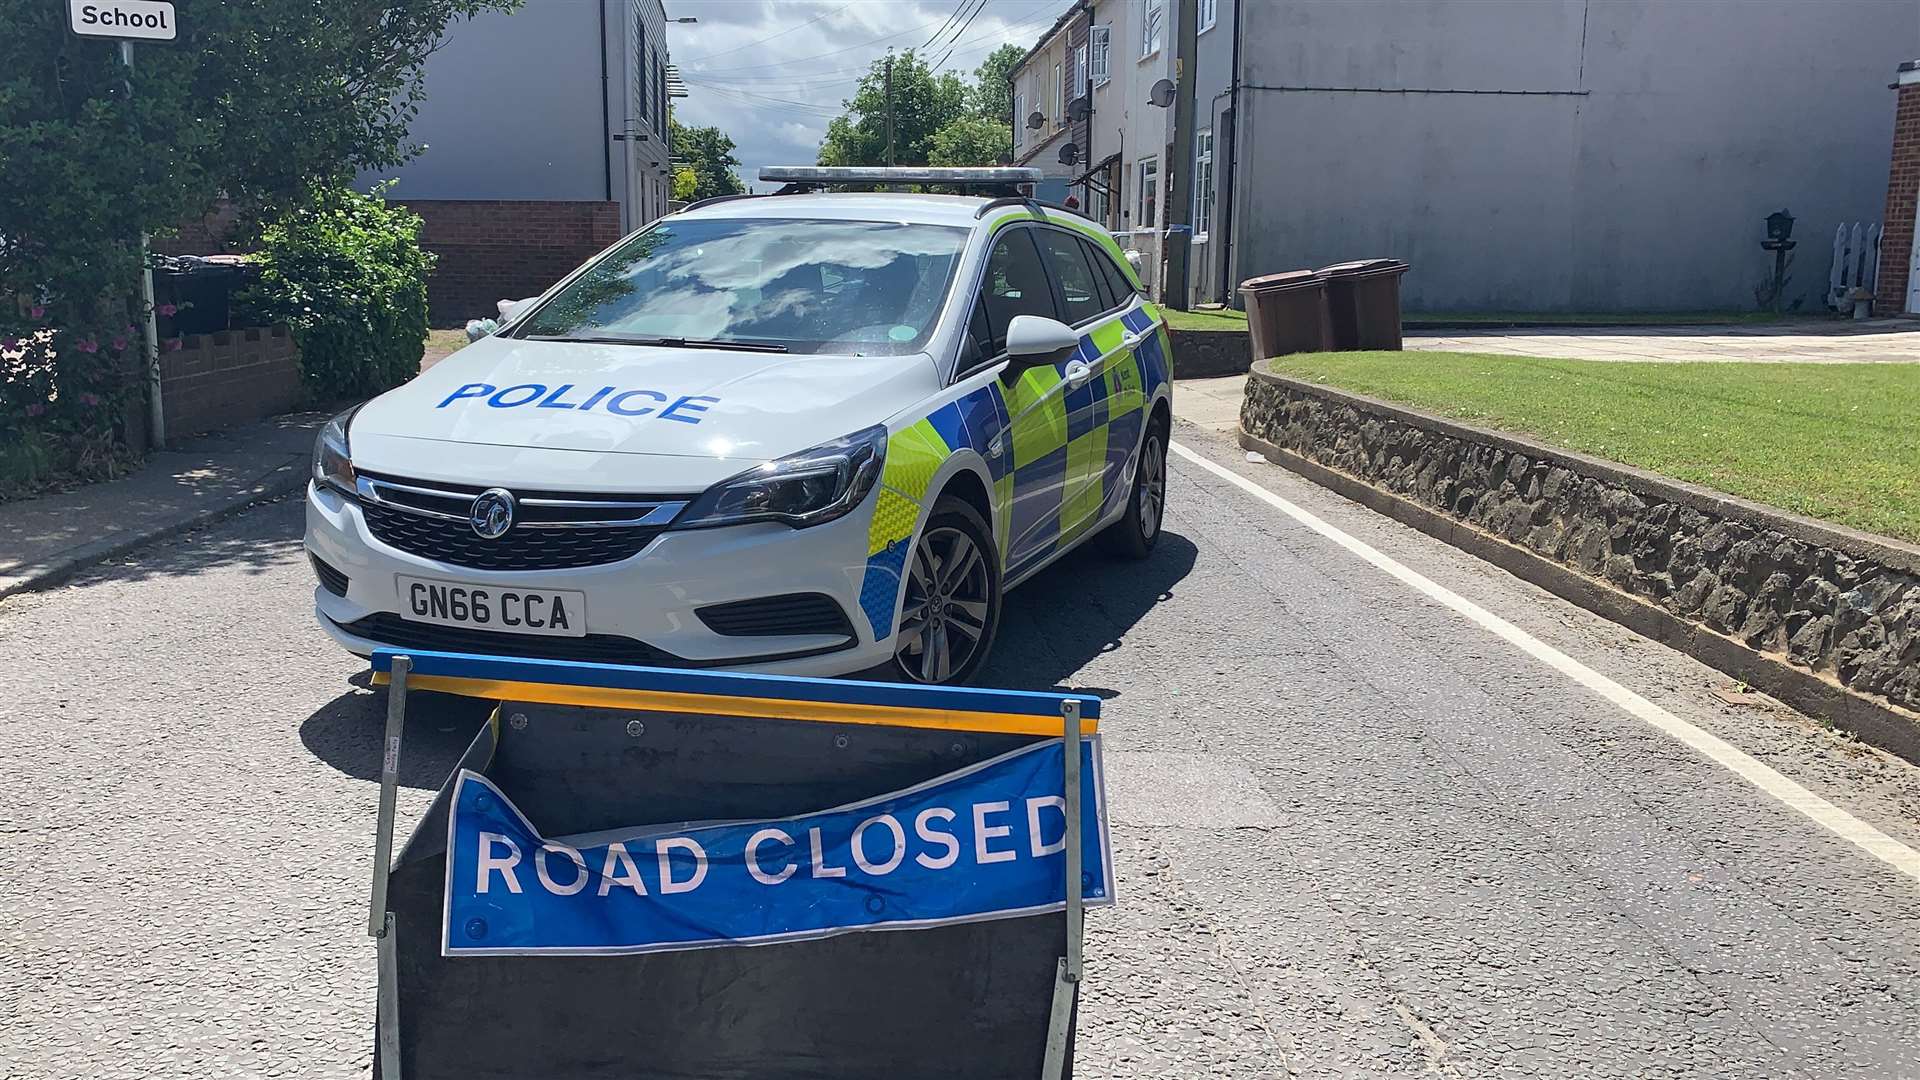 Police have advised properties in Church Street are evacuated as a suspected wartime munition device was brought into St Helens Primary School (12344083)